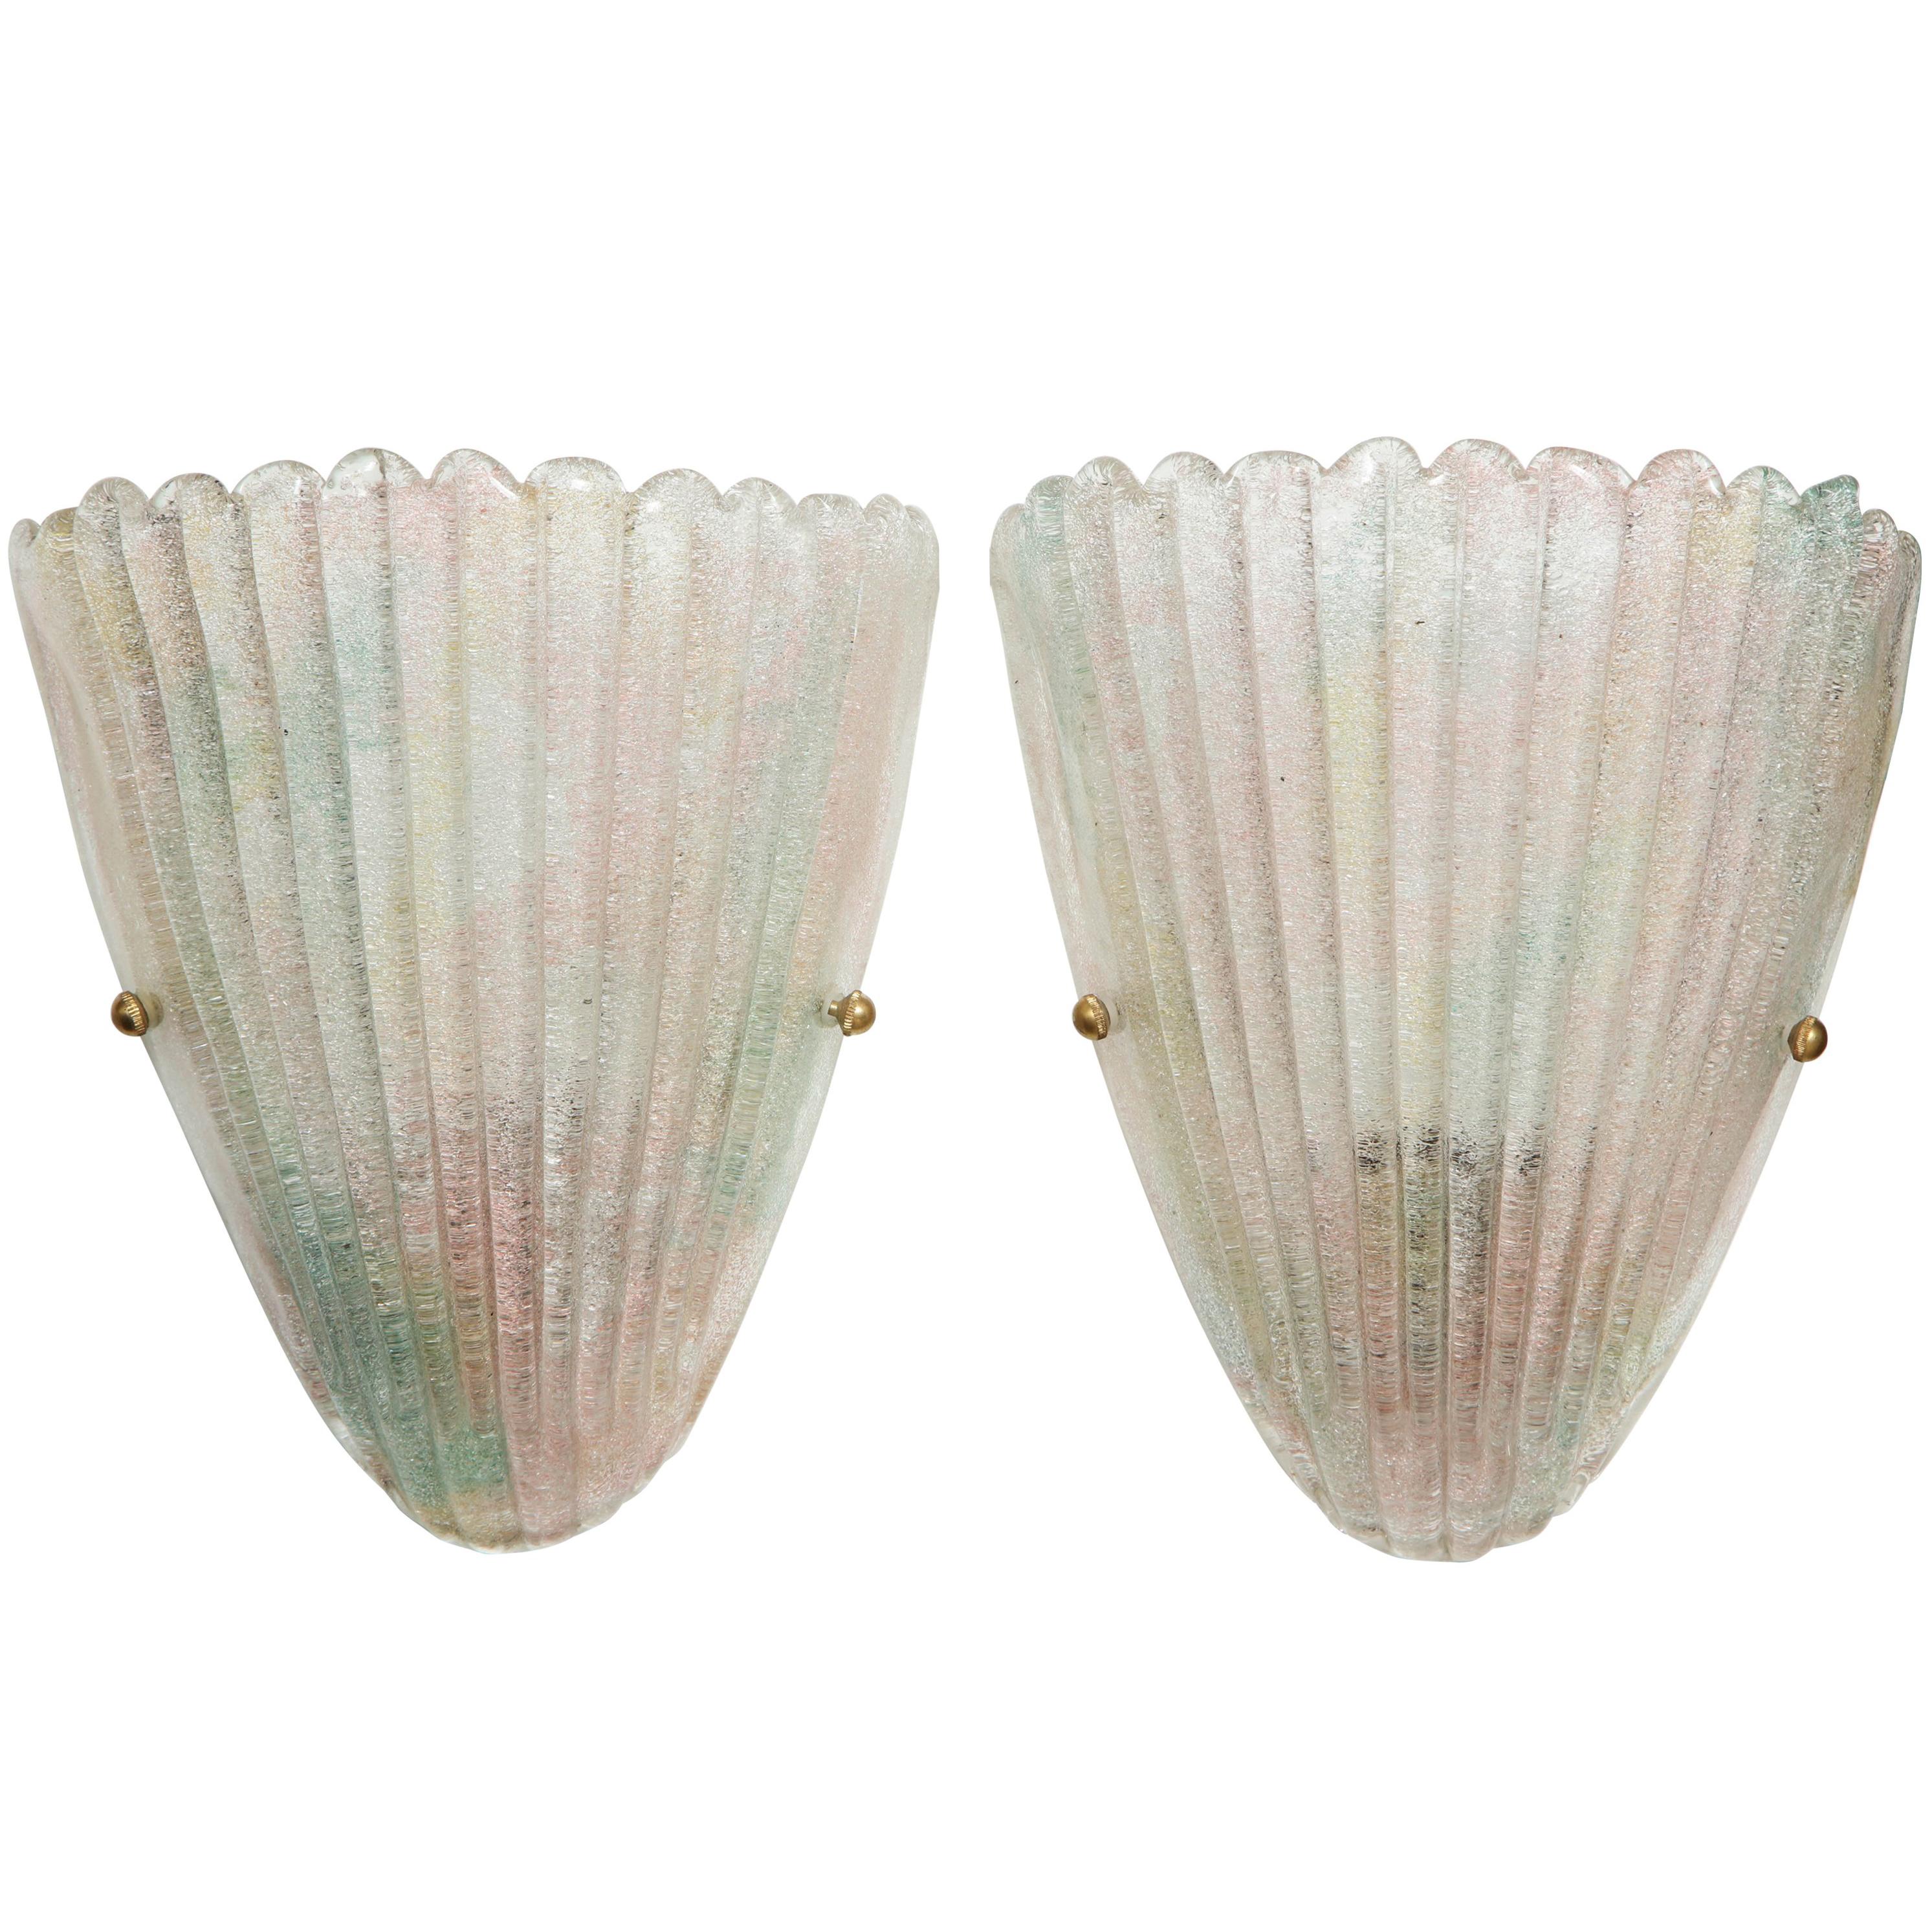 Murano Glass Shell Sconces, 1 of 2 pairs